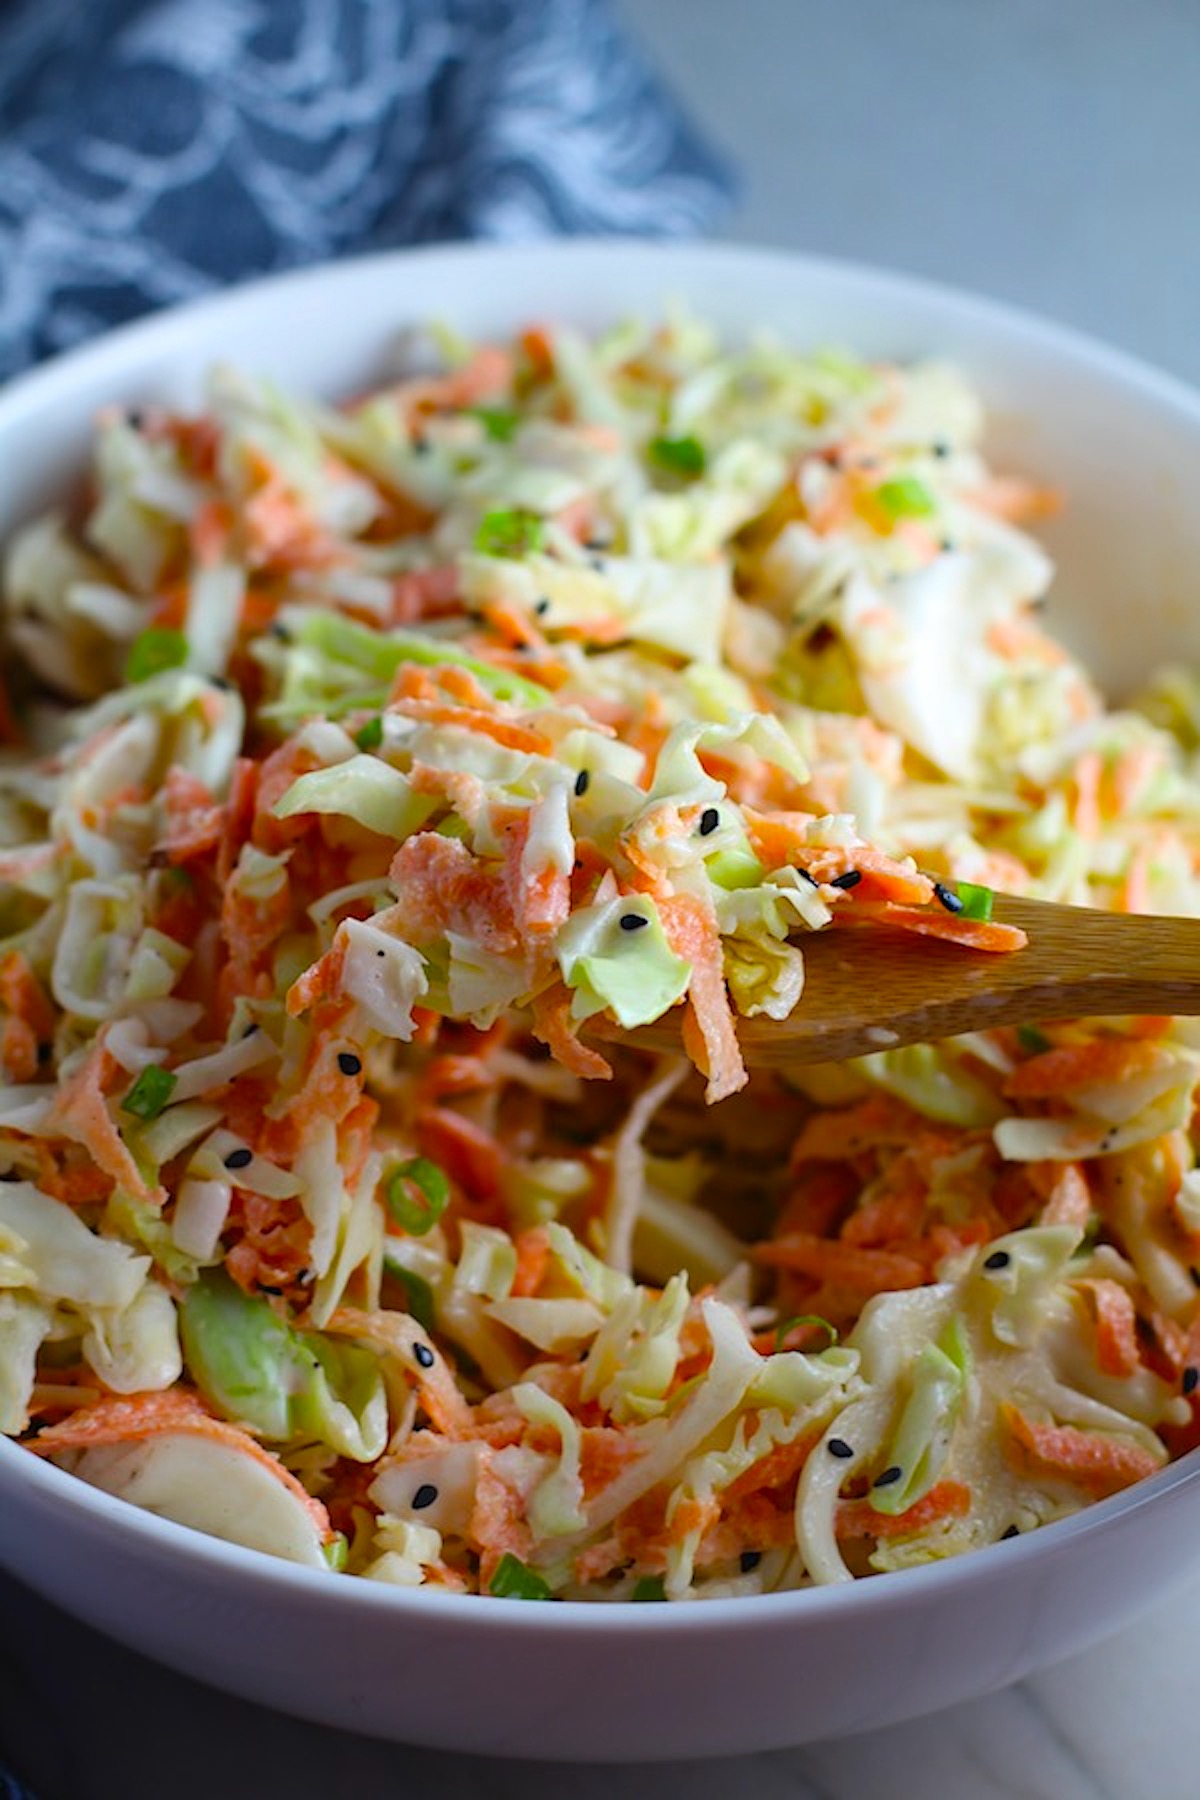 Spoon scooping Coleslaw with an asian salad dressing recipe from a bowl! It has cabbage, carrots, scallions, and sesame seeds in a creamy dressing with mayonnaise. vinegar, soy sauce, and Sesame Oil.  It really is a sidekick that can go with anything!